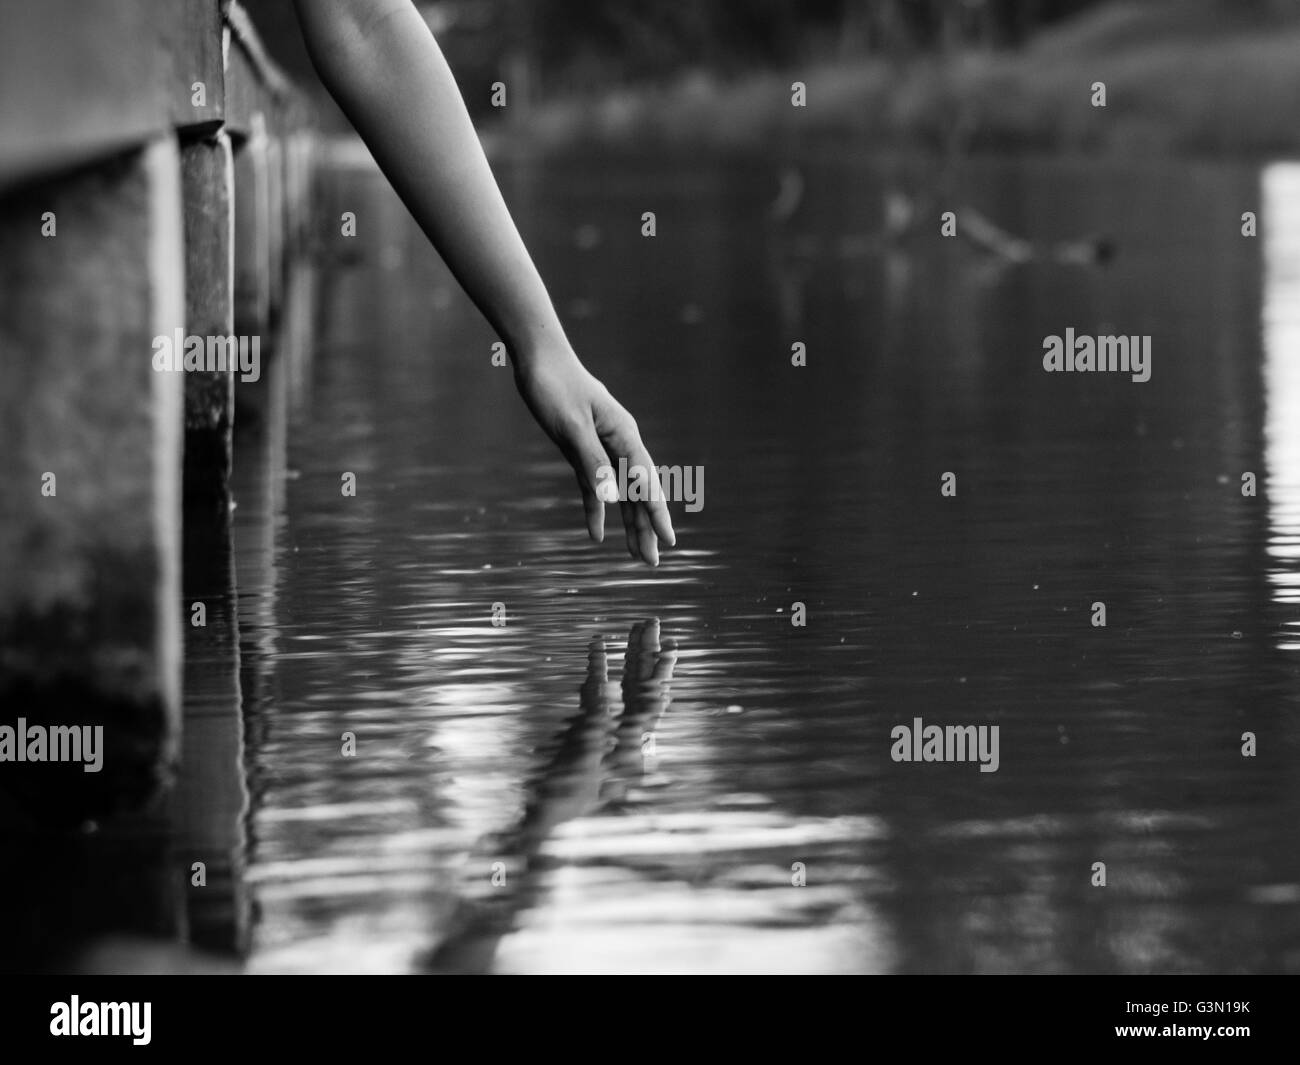 A hand reaching to water surface with reflection Stock Photo